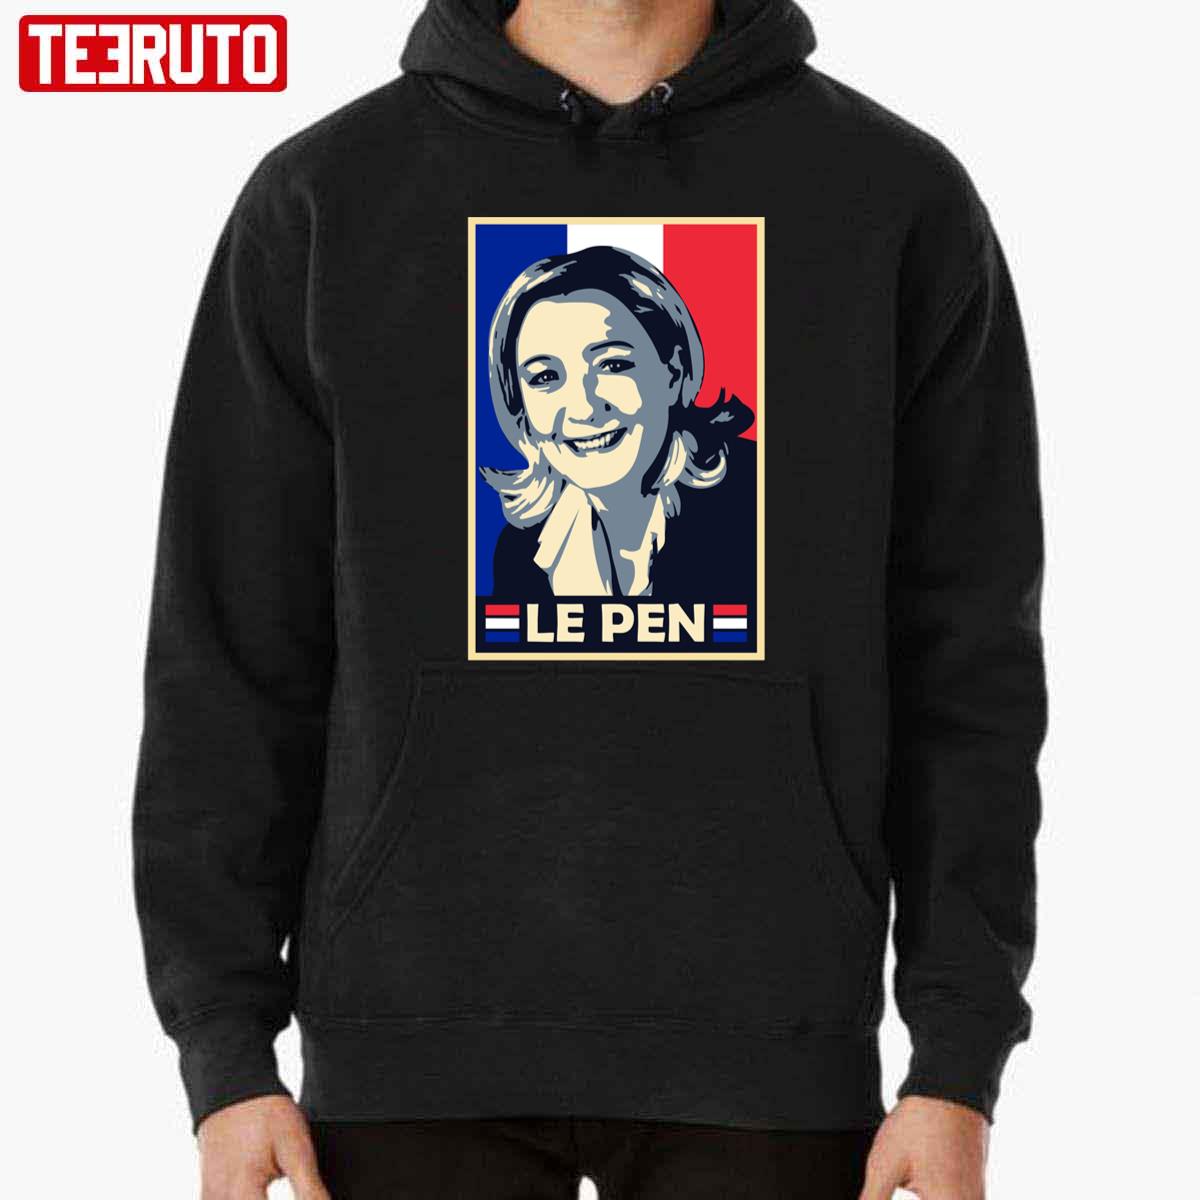 Marine Le Pen France President National Rally Front Politician Unisex T-Shirt